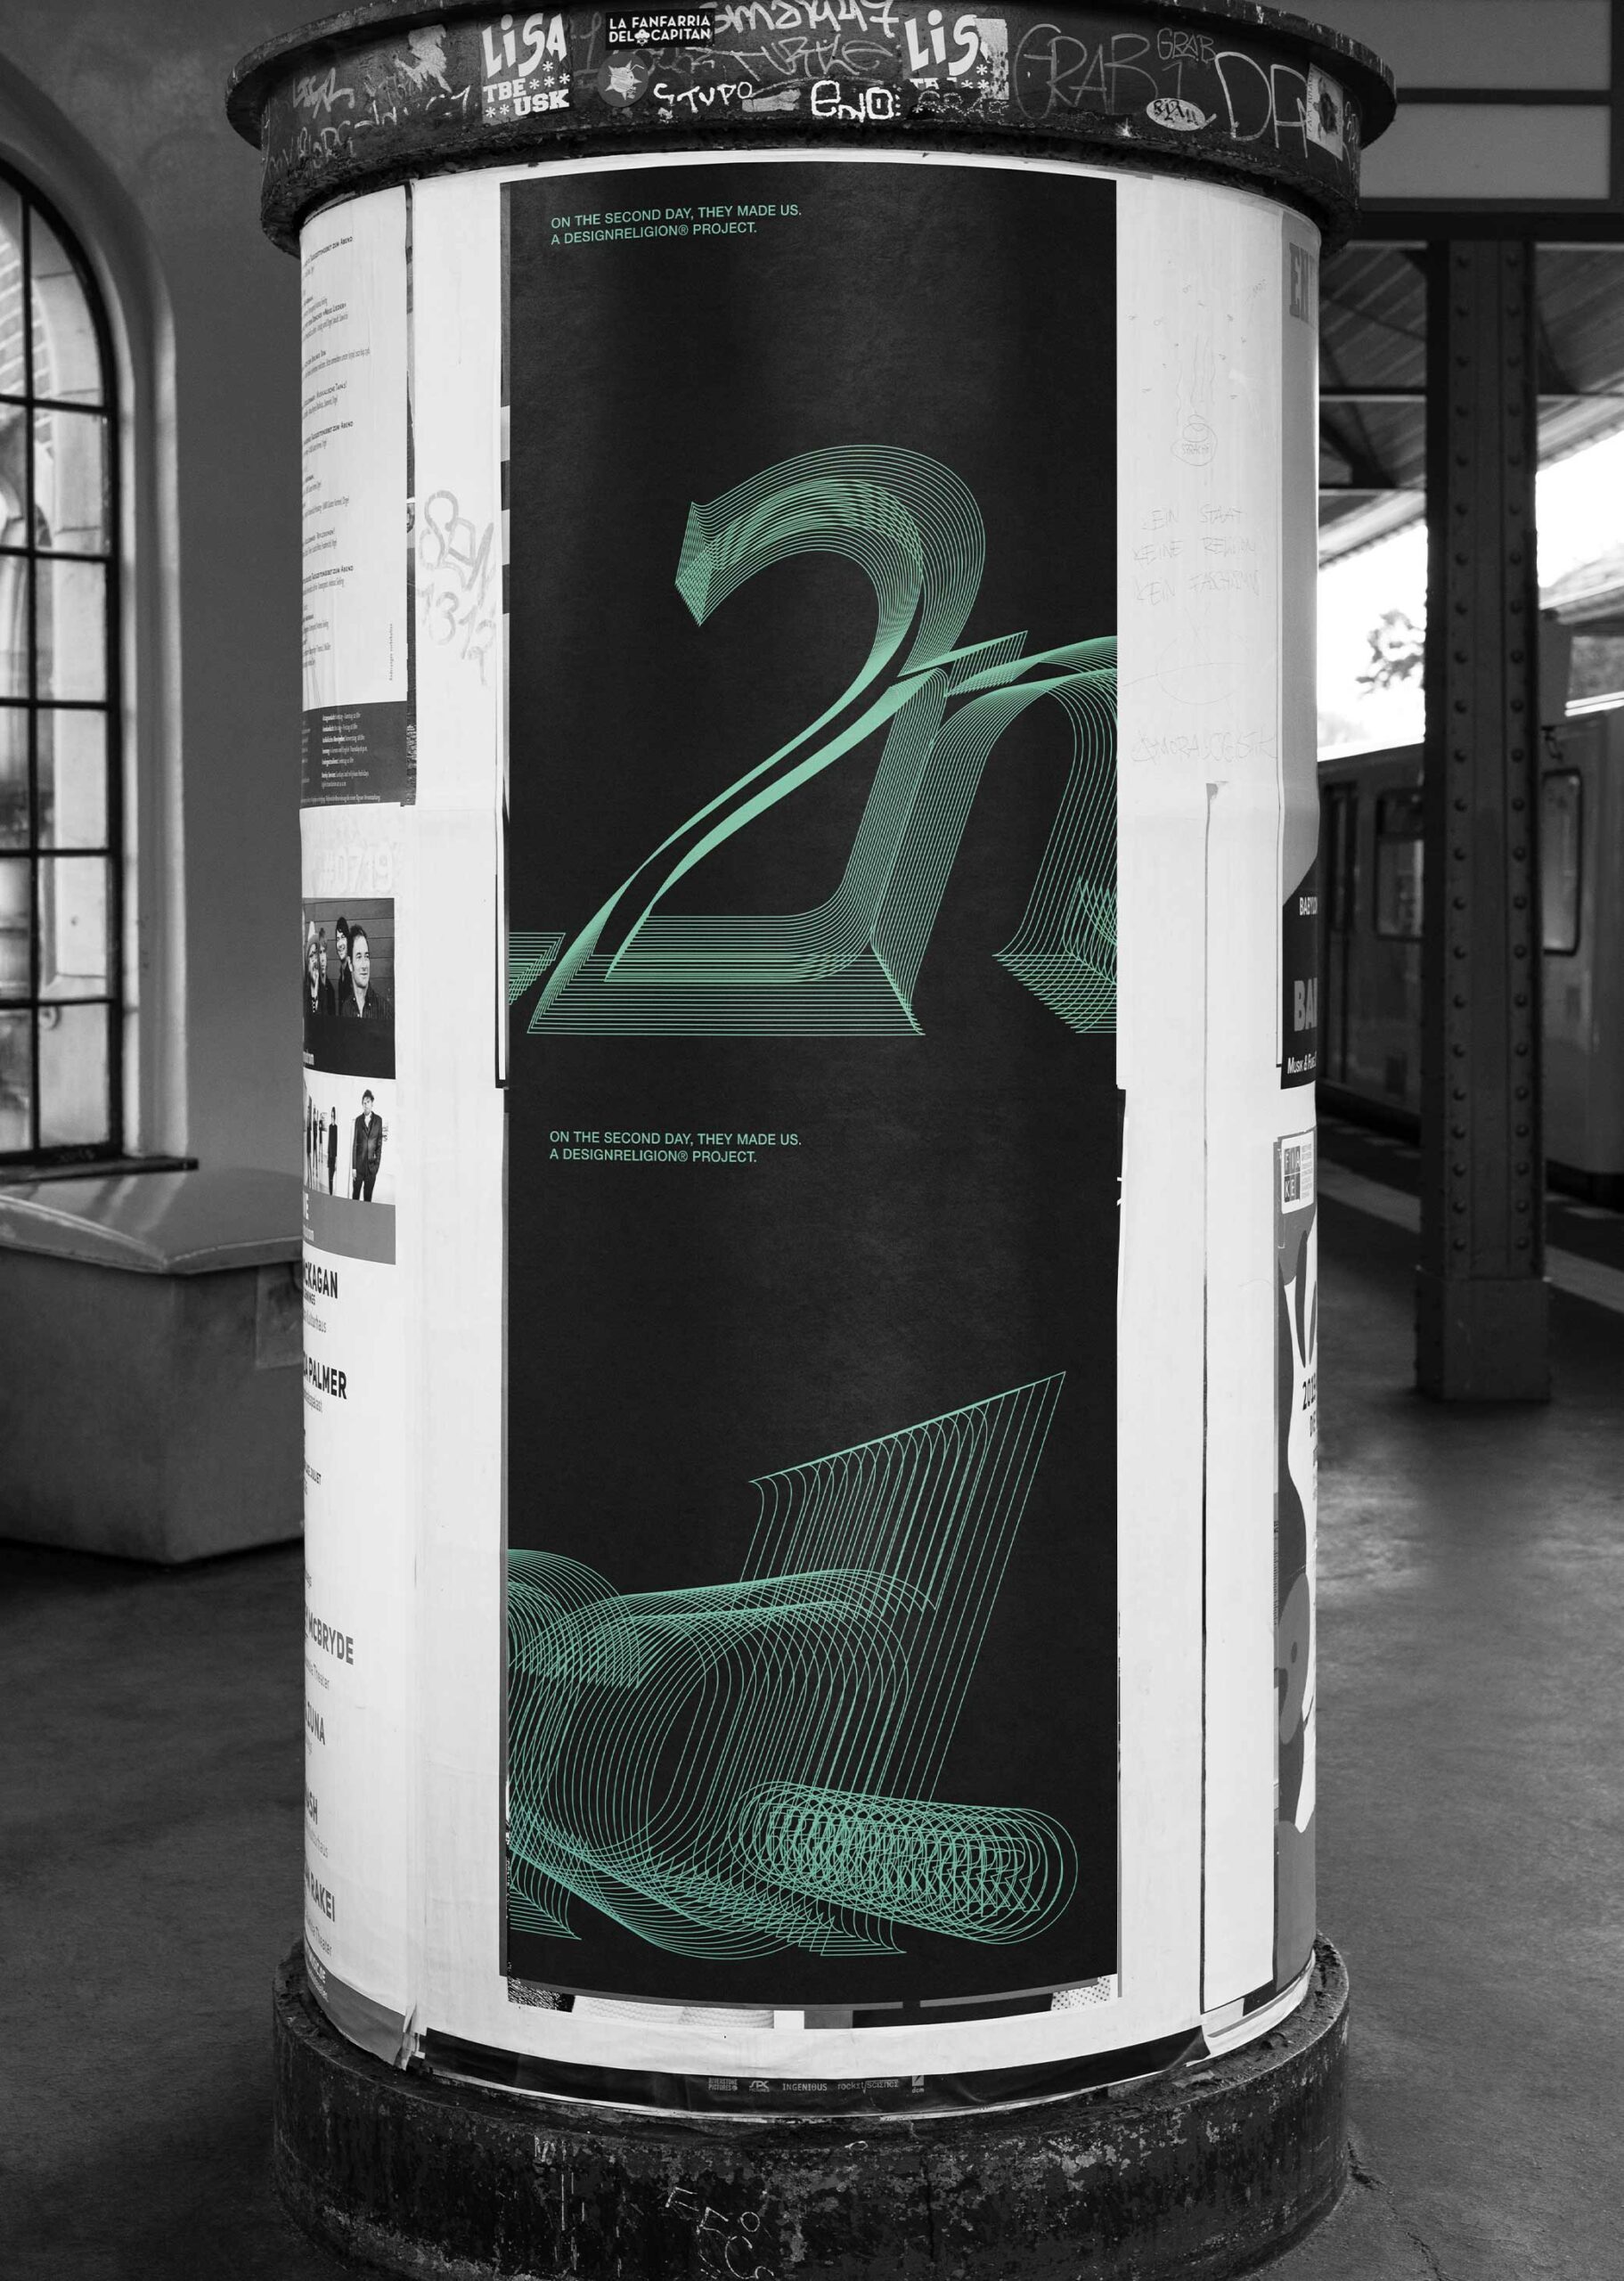 Creative poster design on a train station pillar using the Second Day branding identity